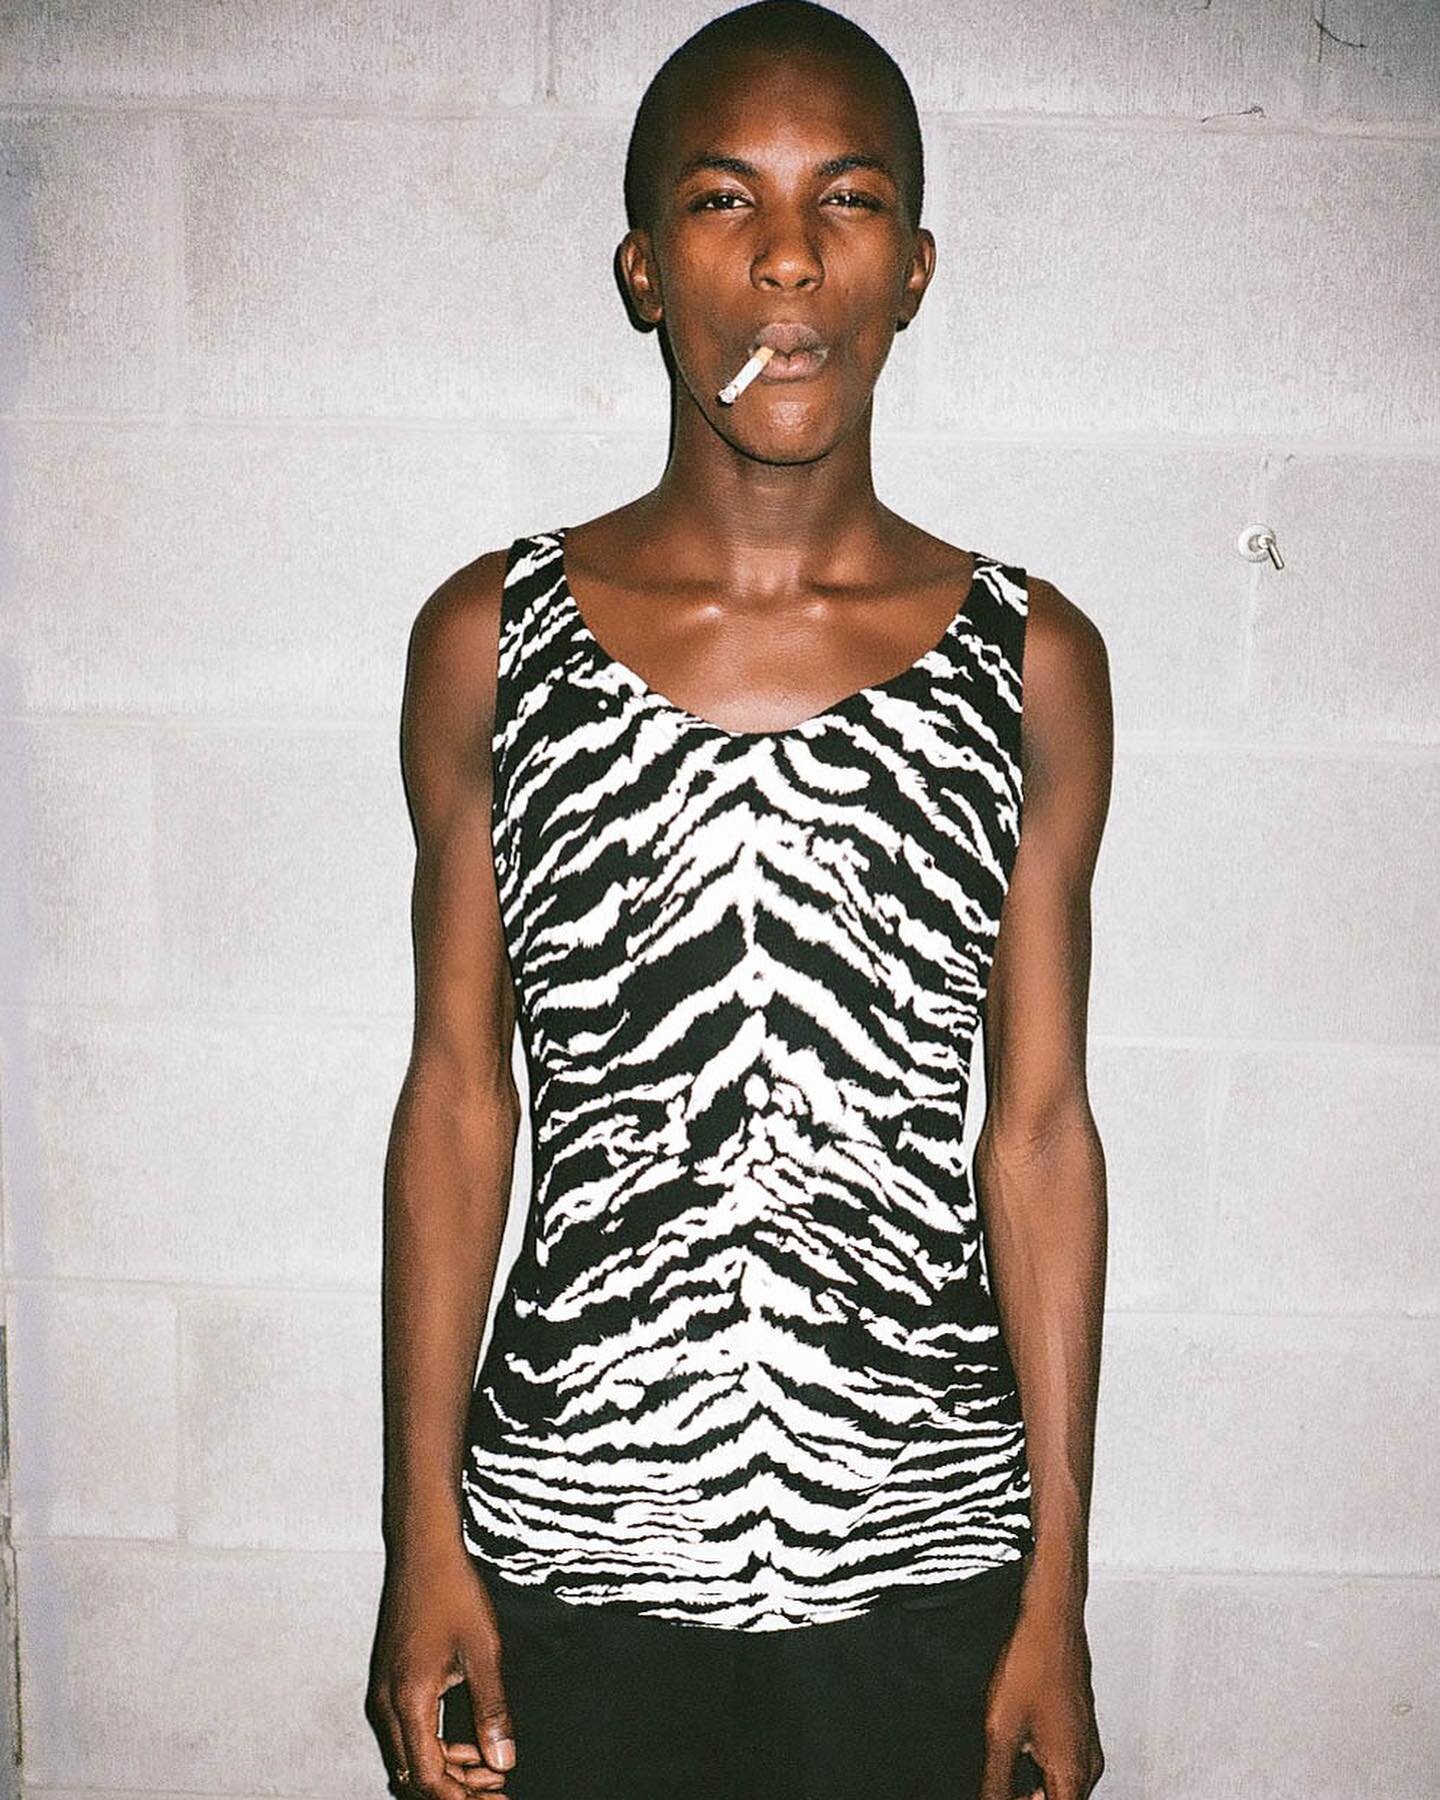 What The Nighttime Brought In⁣
📷Submitted by Agathe Bruyninckx (@agathebkx)⁣
⁣
&ldquo;portraits of friends and strangers taken in various occasions and events of Milan nightlife; a tribute to the quirky, queer, and fun places that come to life at ni